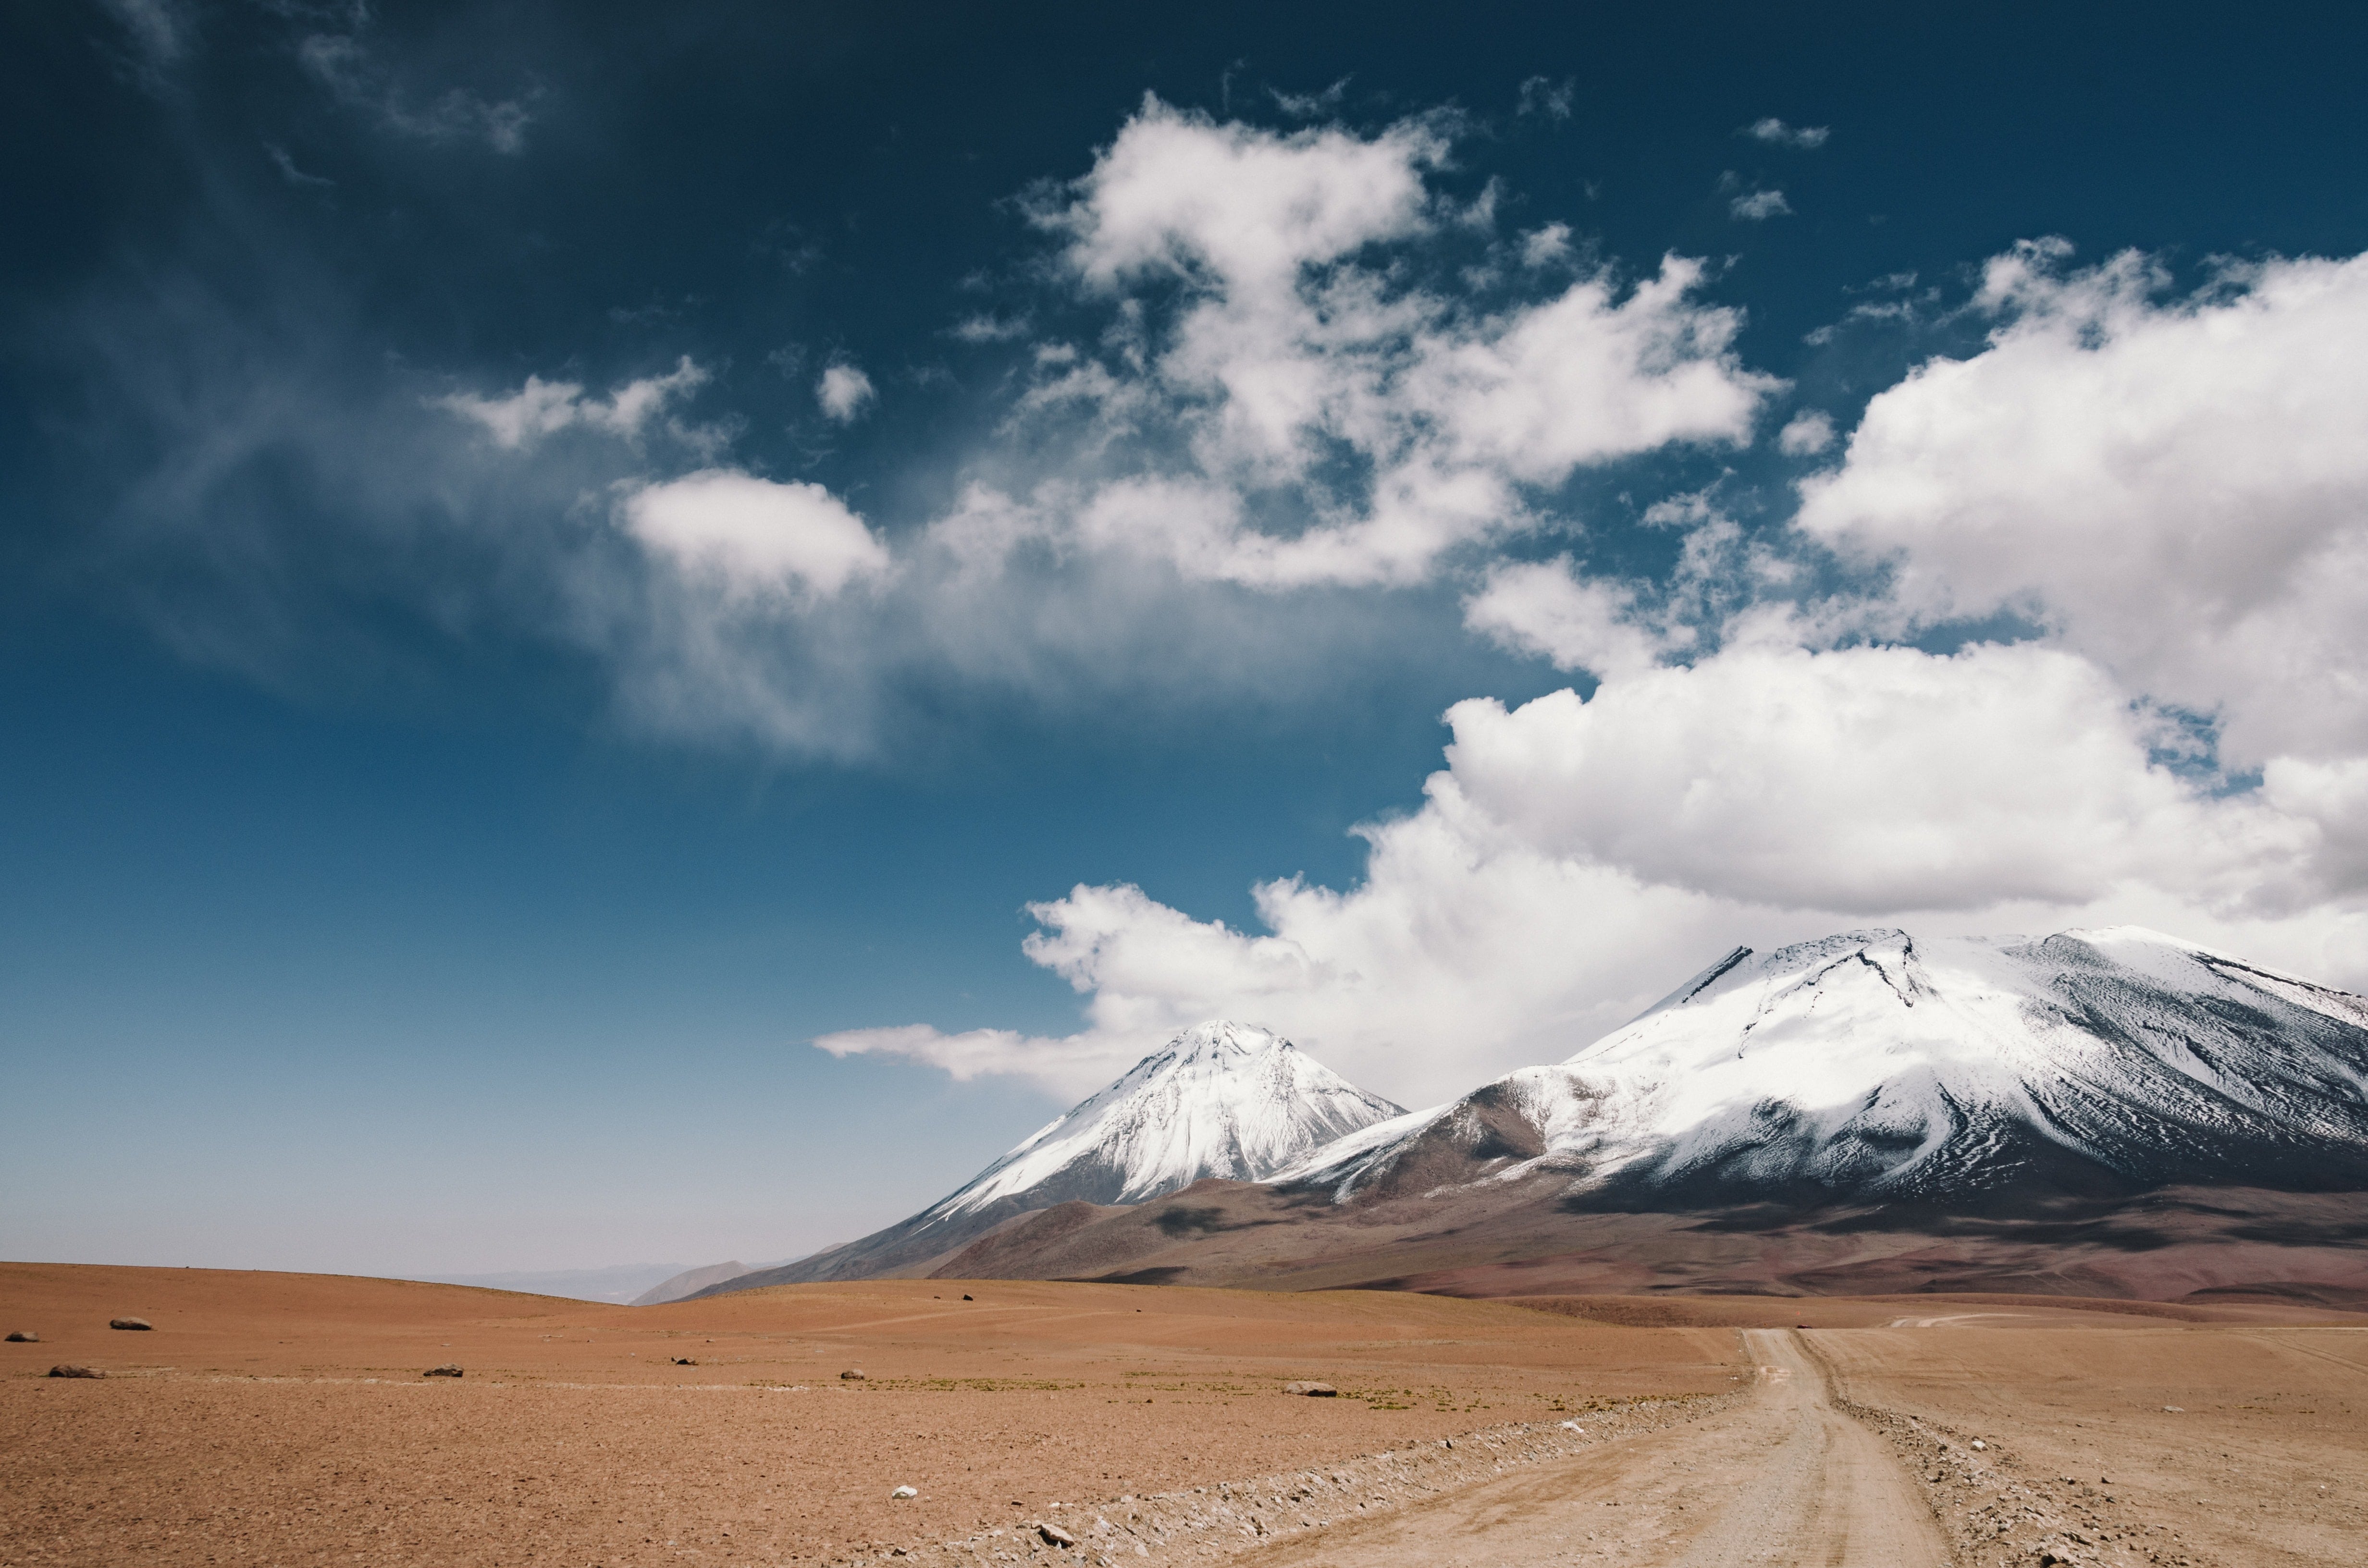 Picture from Marcelo Quinan on Unsplash, showing the Licancabur volcano from the Chilean side.